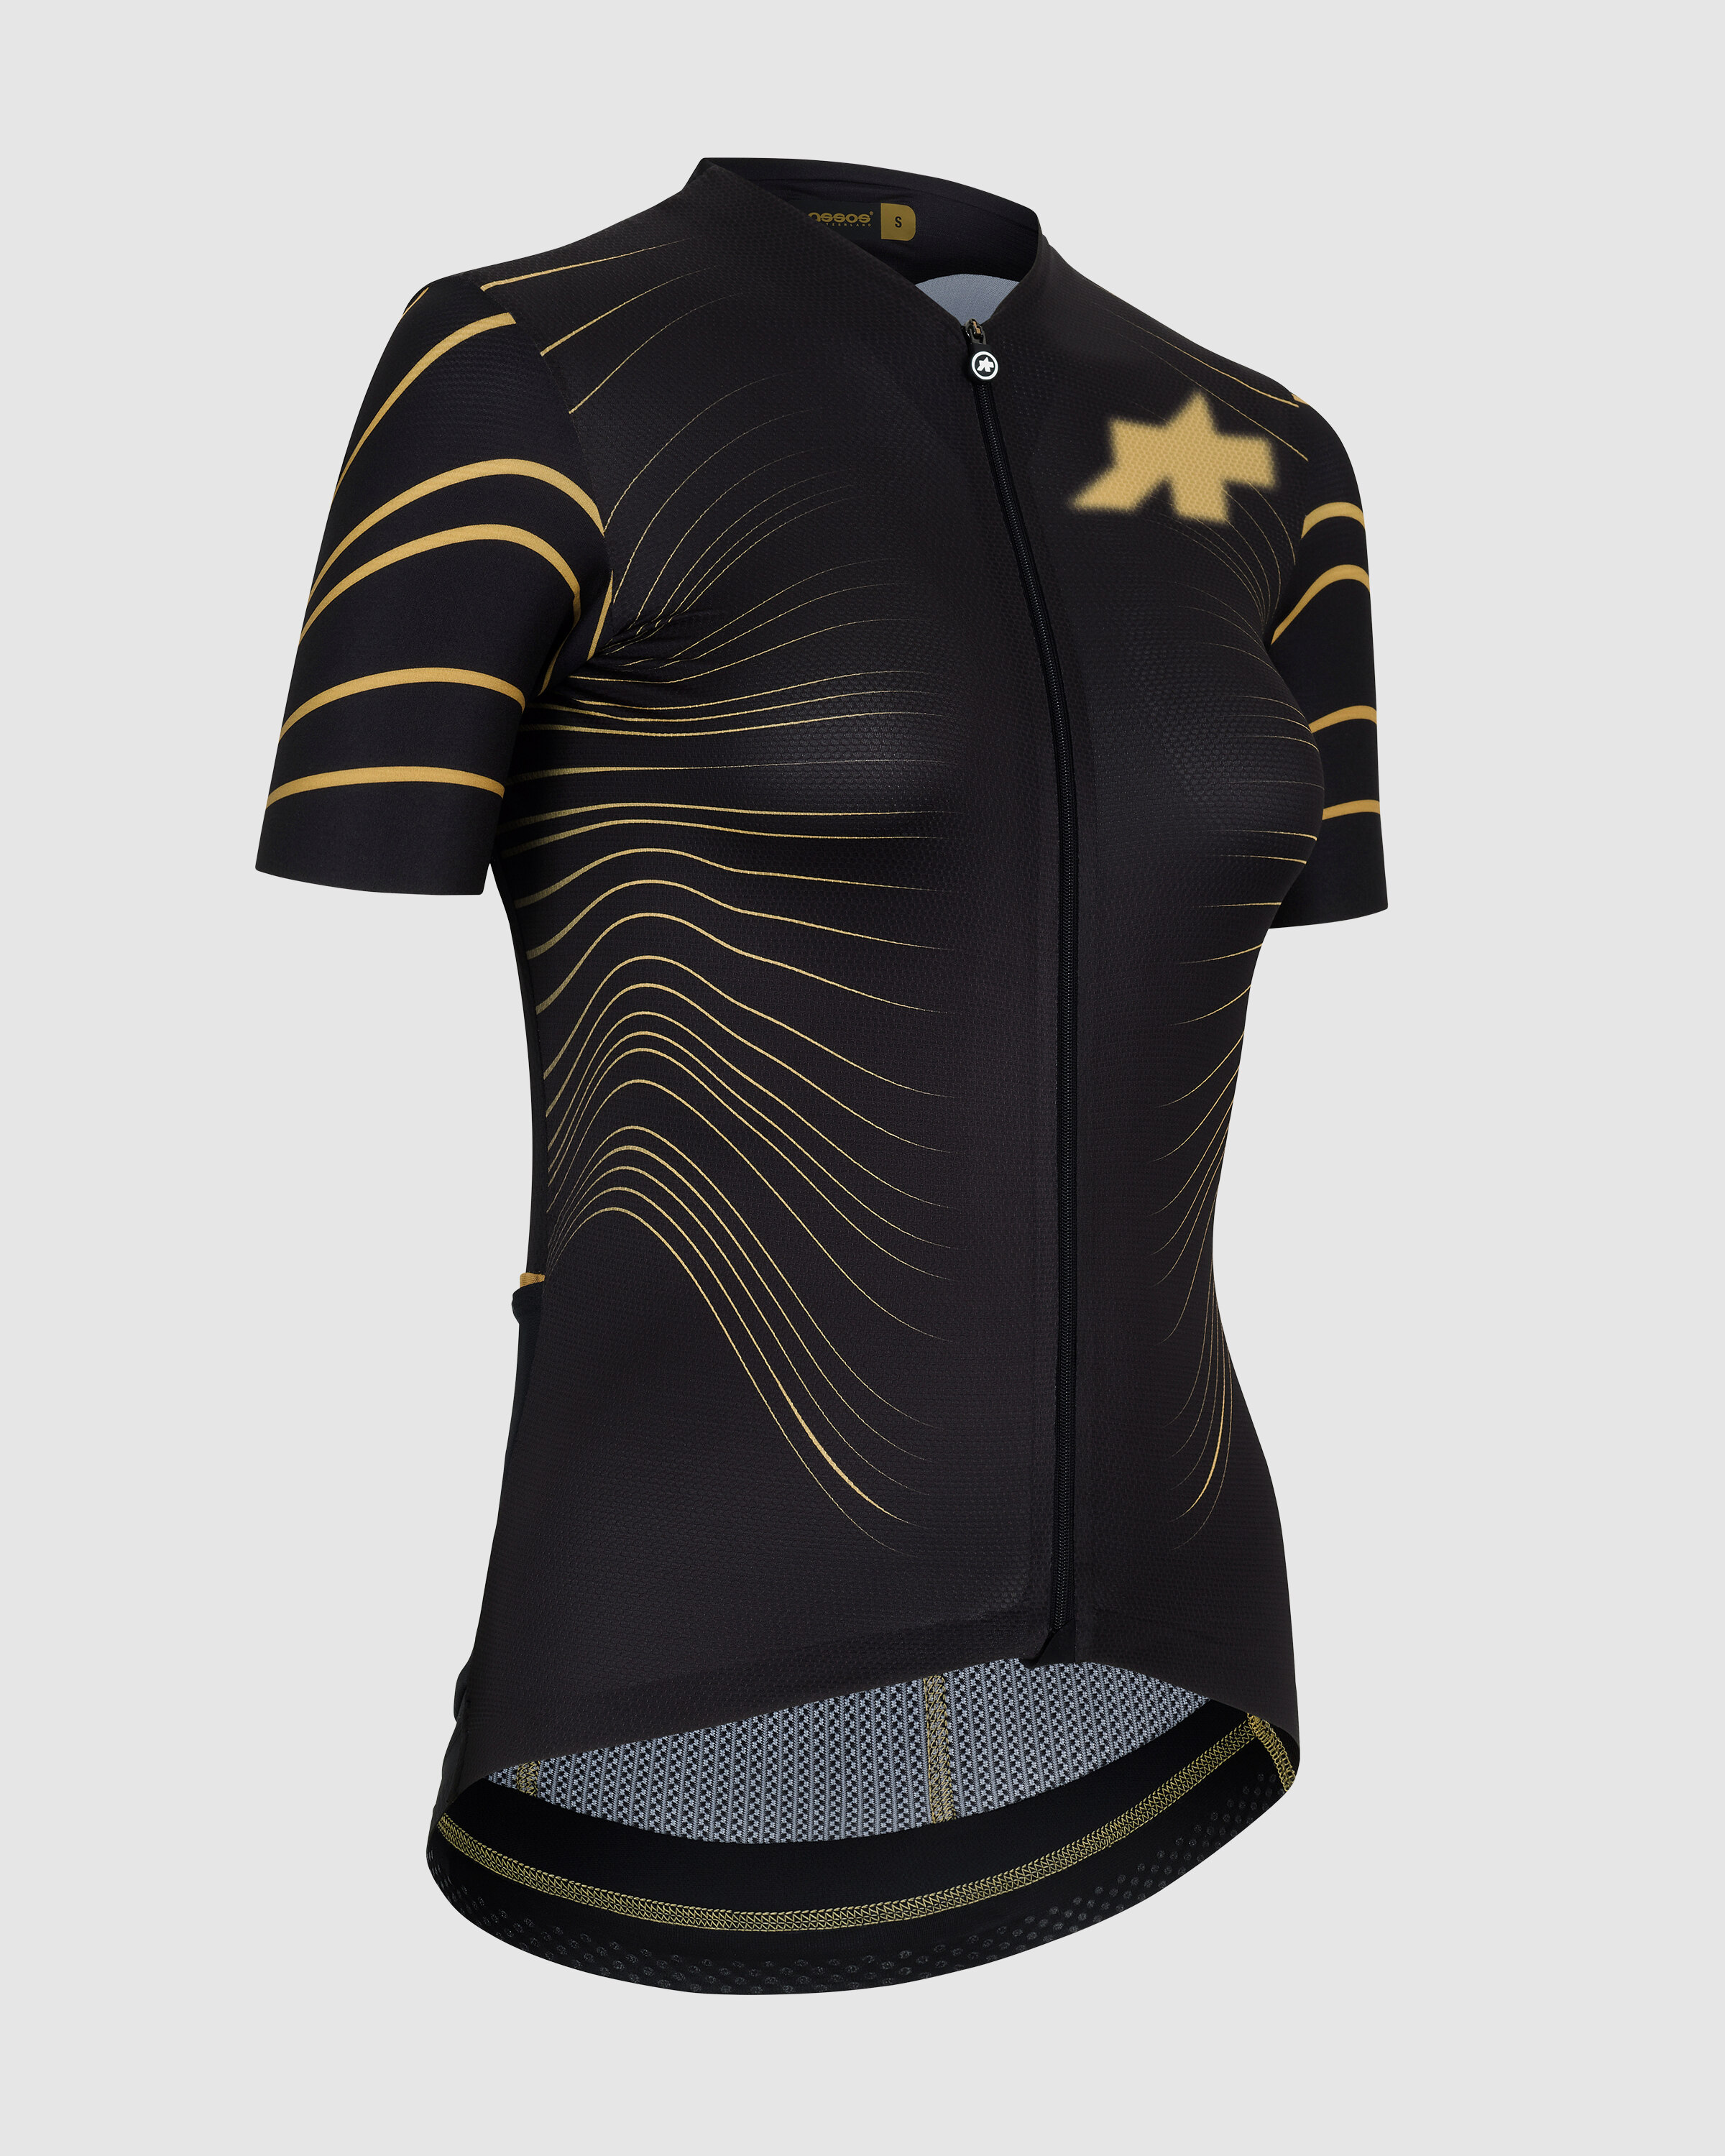 DYORA RS JERSEY S9 - WINGS OF SPEED - ASSOS Of Switzerland - Official Outlet